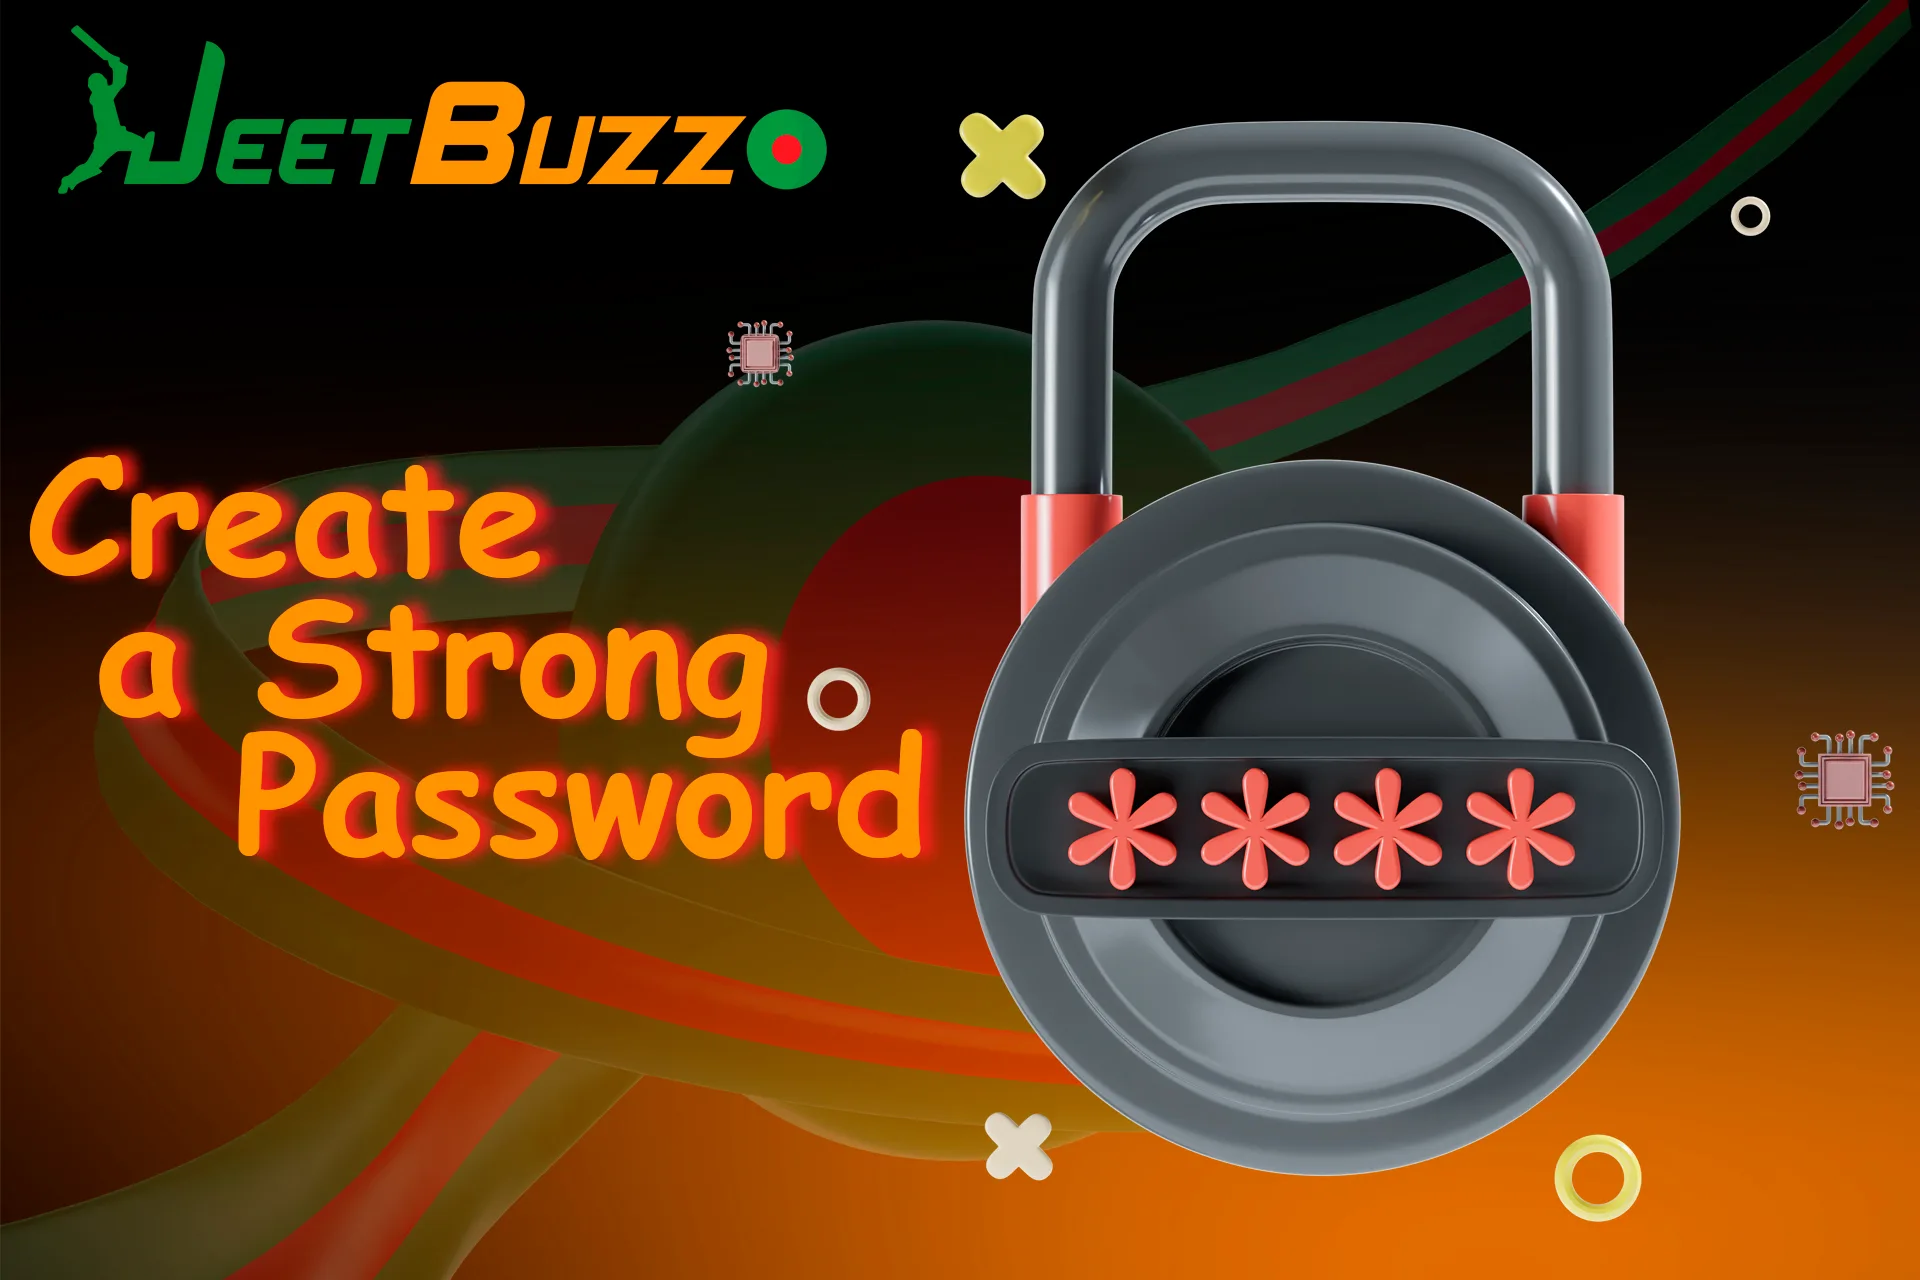 some tips for creating a secure password